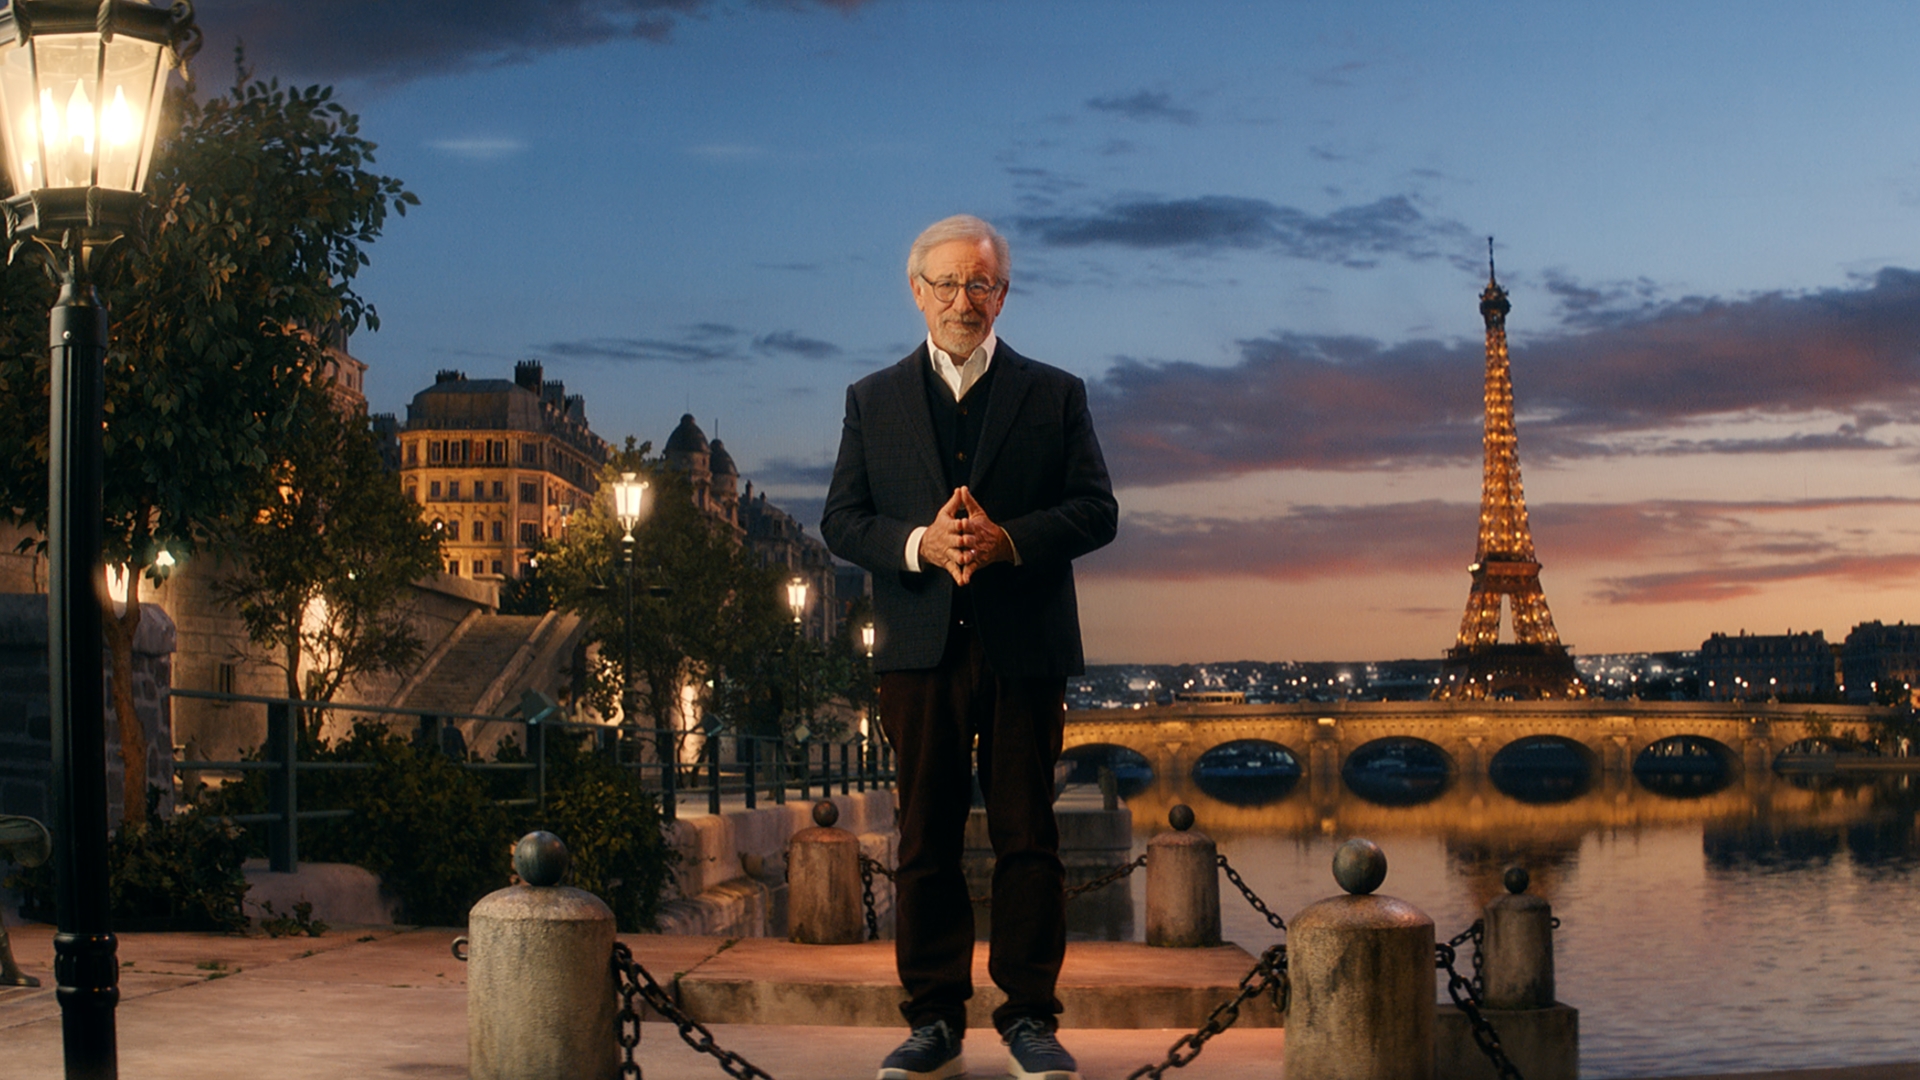 Steven Spielberg narrates "Land of Stories" as for NBC's Opening Ceremony presentation of the 2024 Paris Olympics.